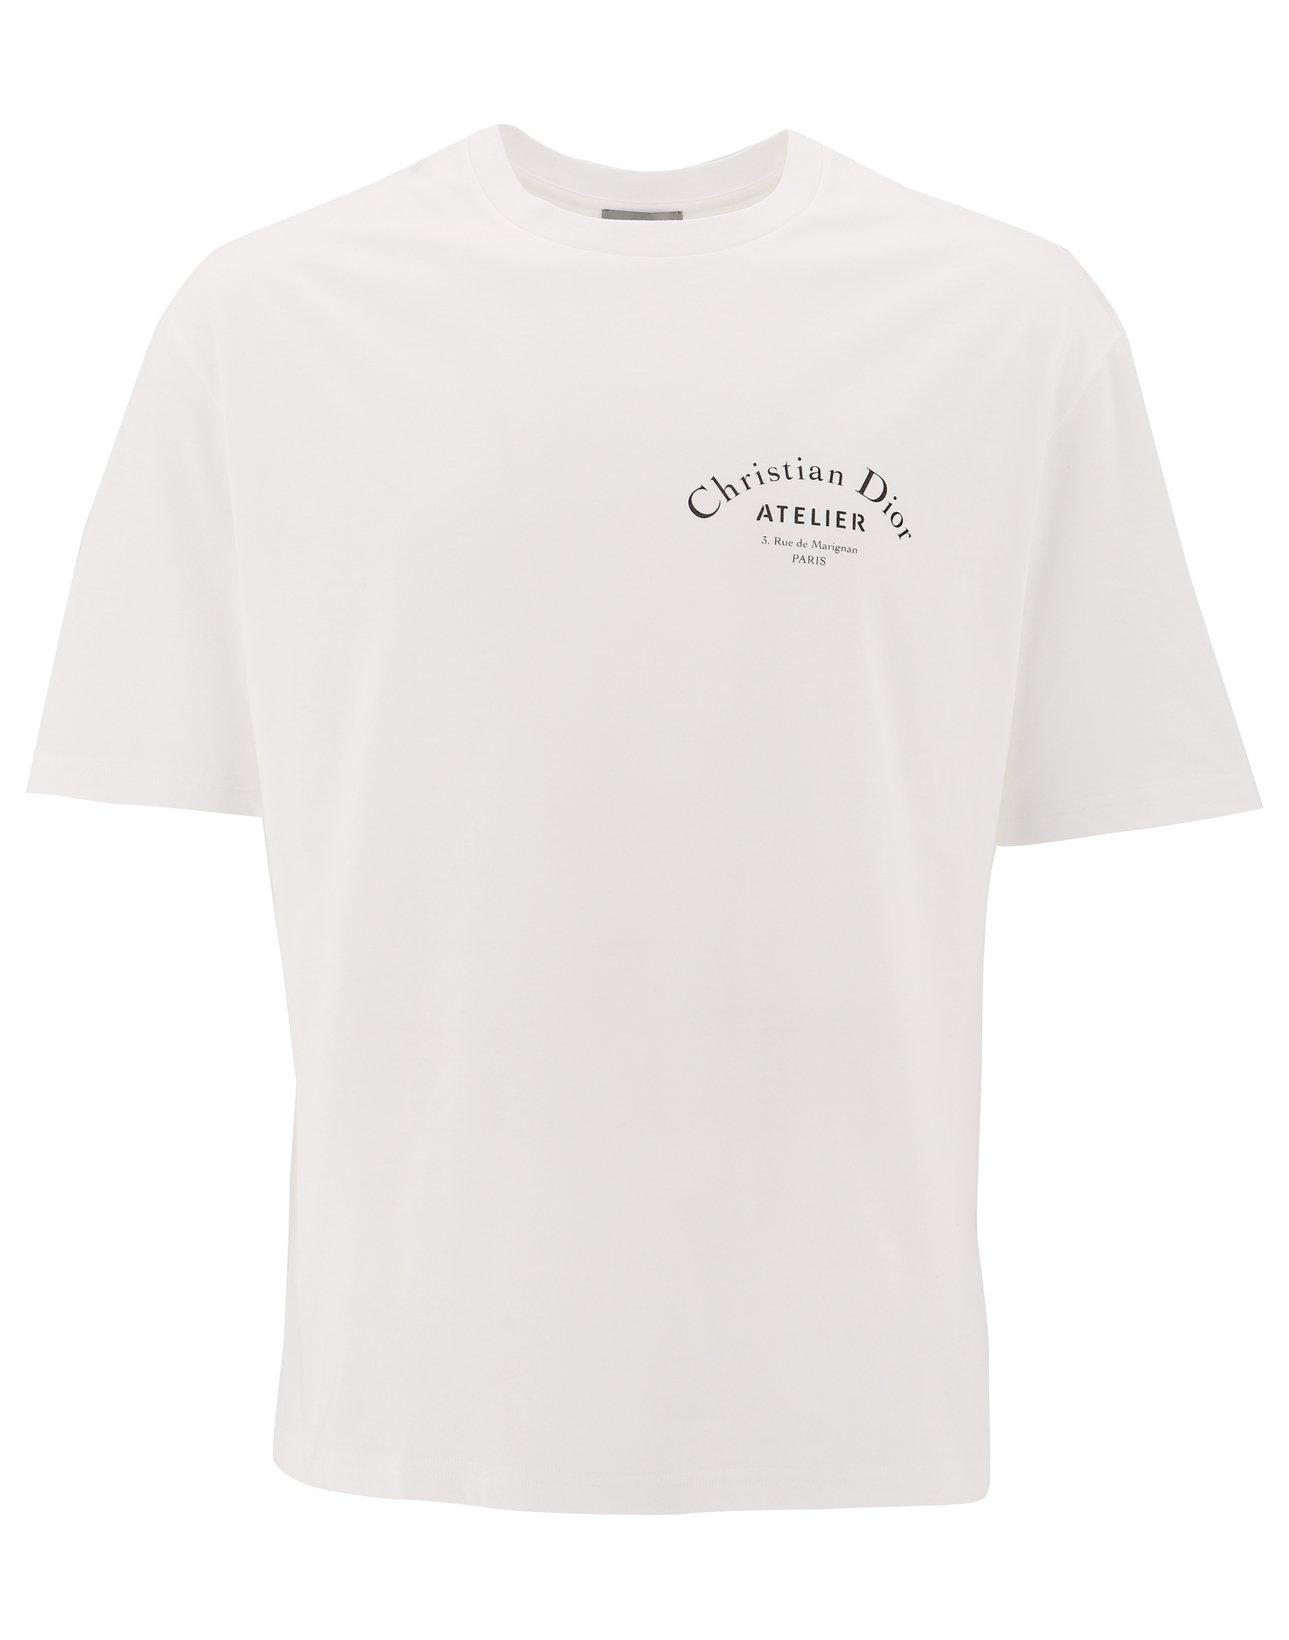 Dior Homme Christian Dior Atelier T-shirt in White for Men | Lyst